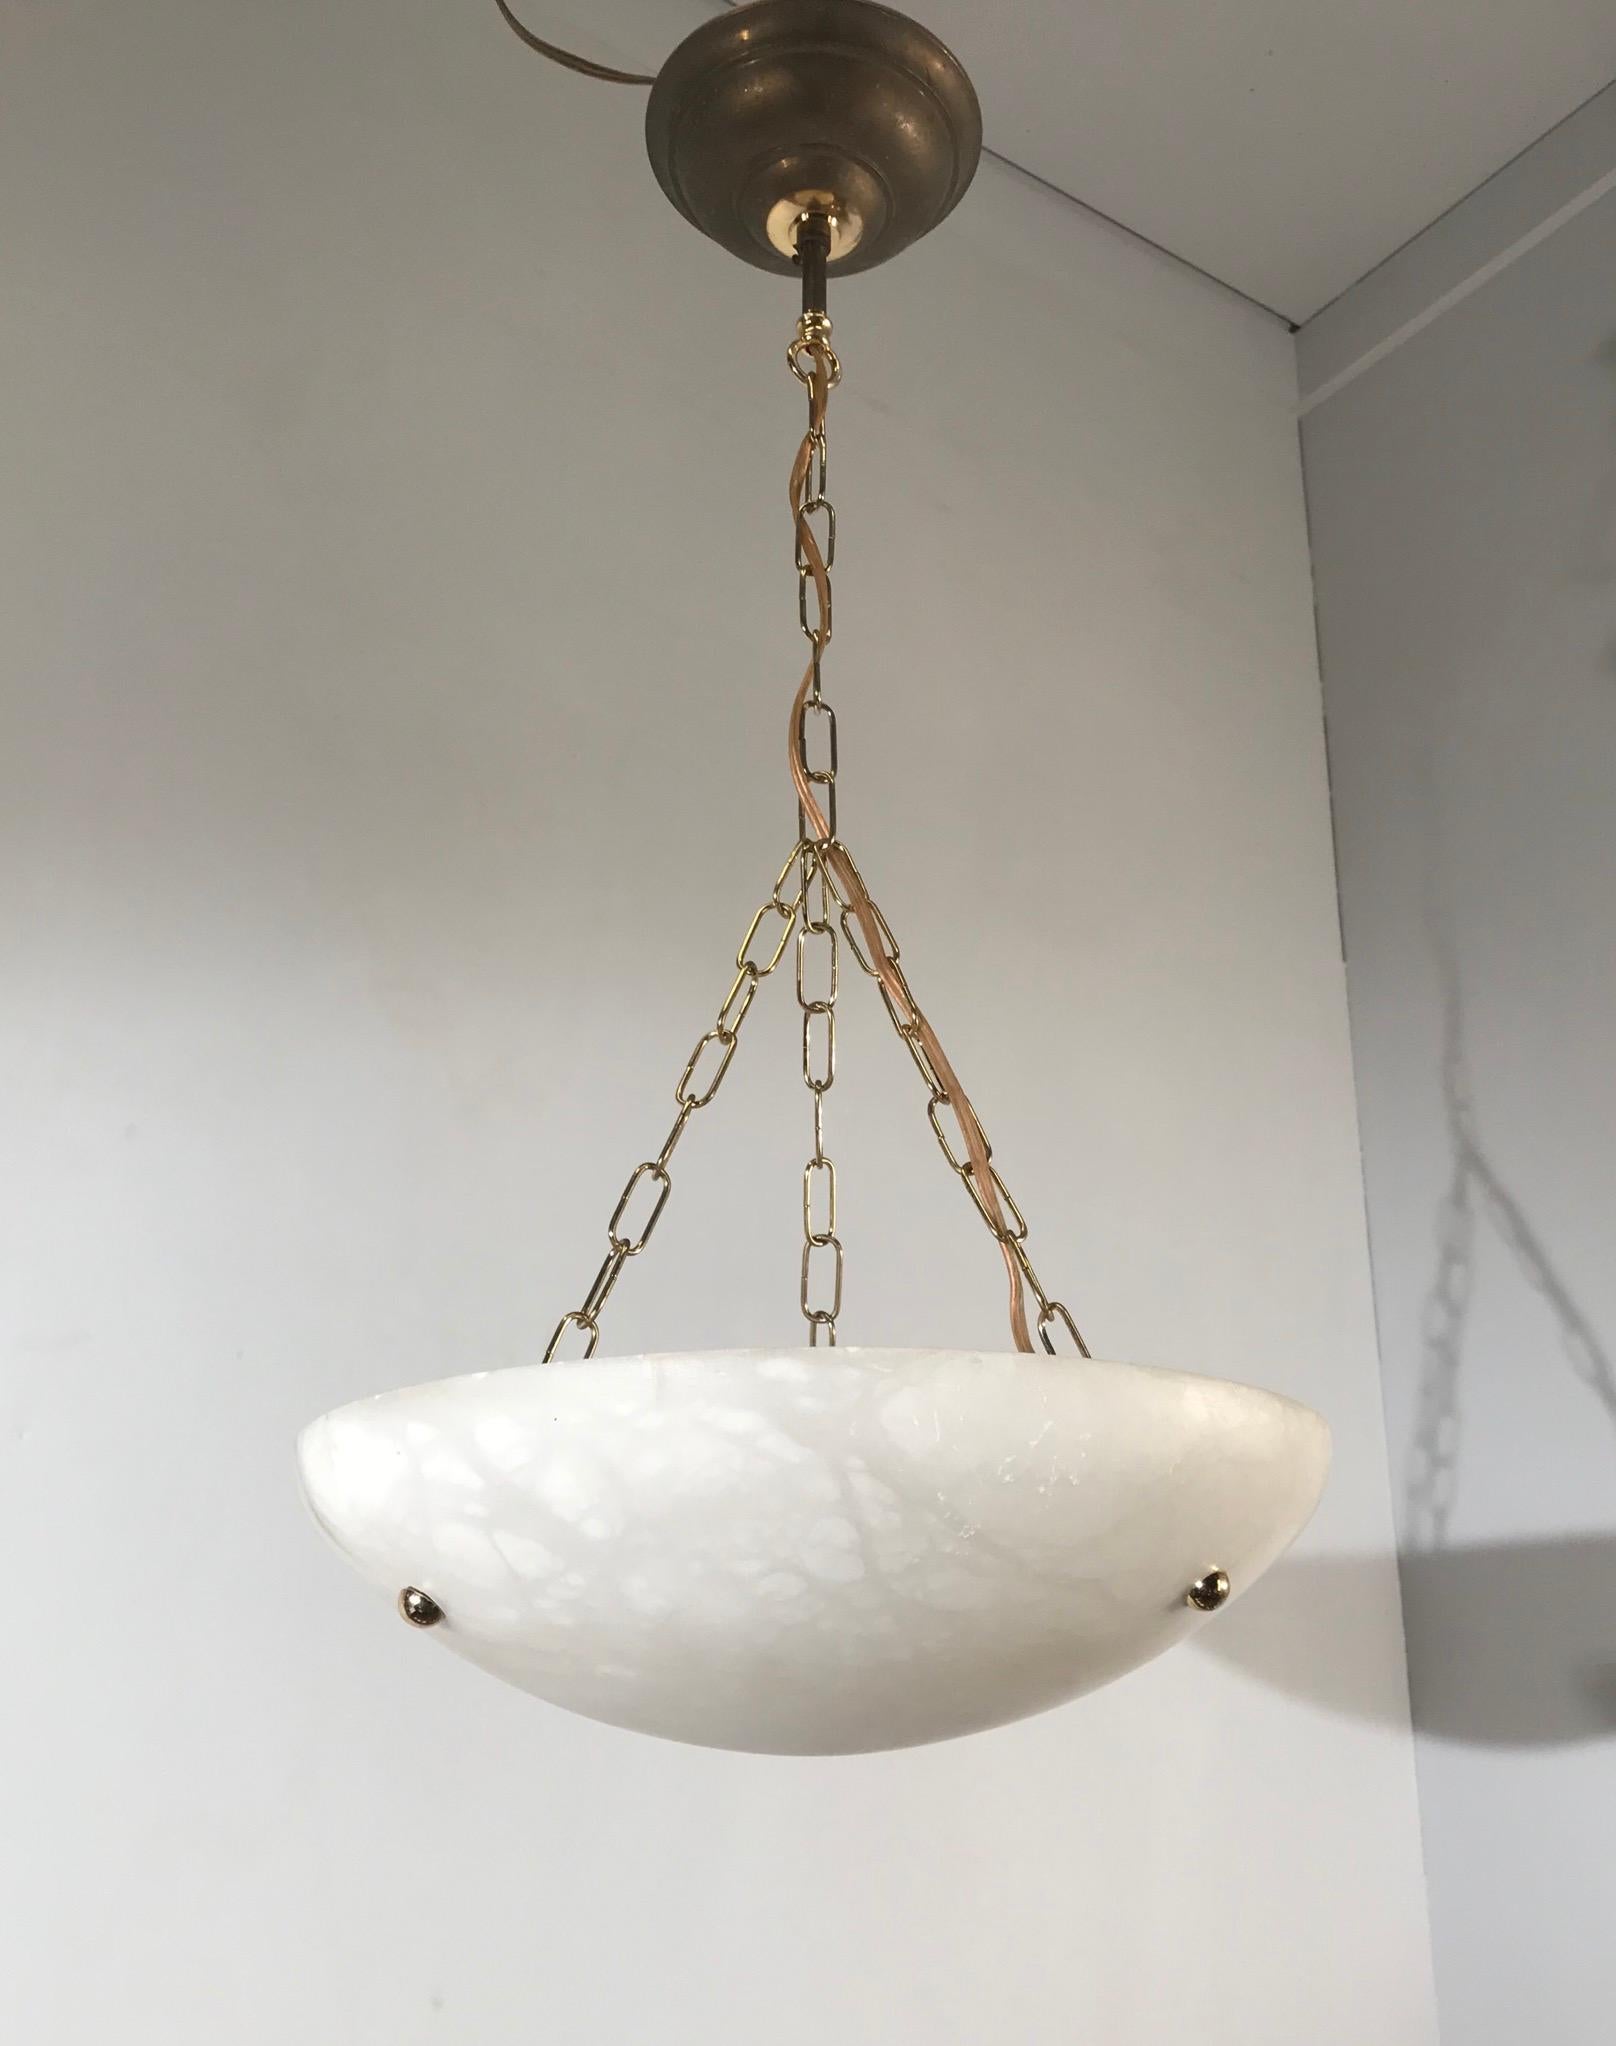 A set of two beautifully shaped mineral stone pendants.

If you are looking for a fine and practical size pair of Art Deco style light fixtures then these two could be perfect for you. These pendants are beautiful to look at, both on and off and the